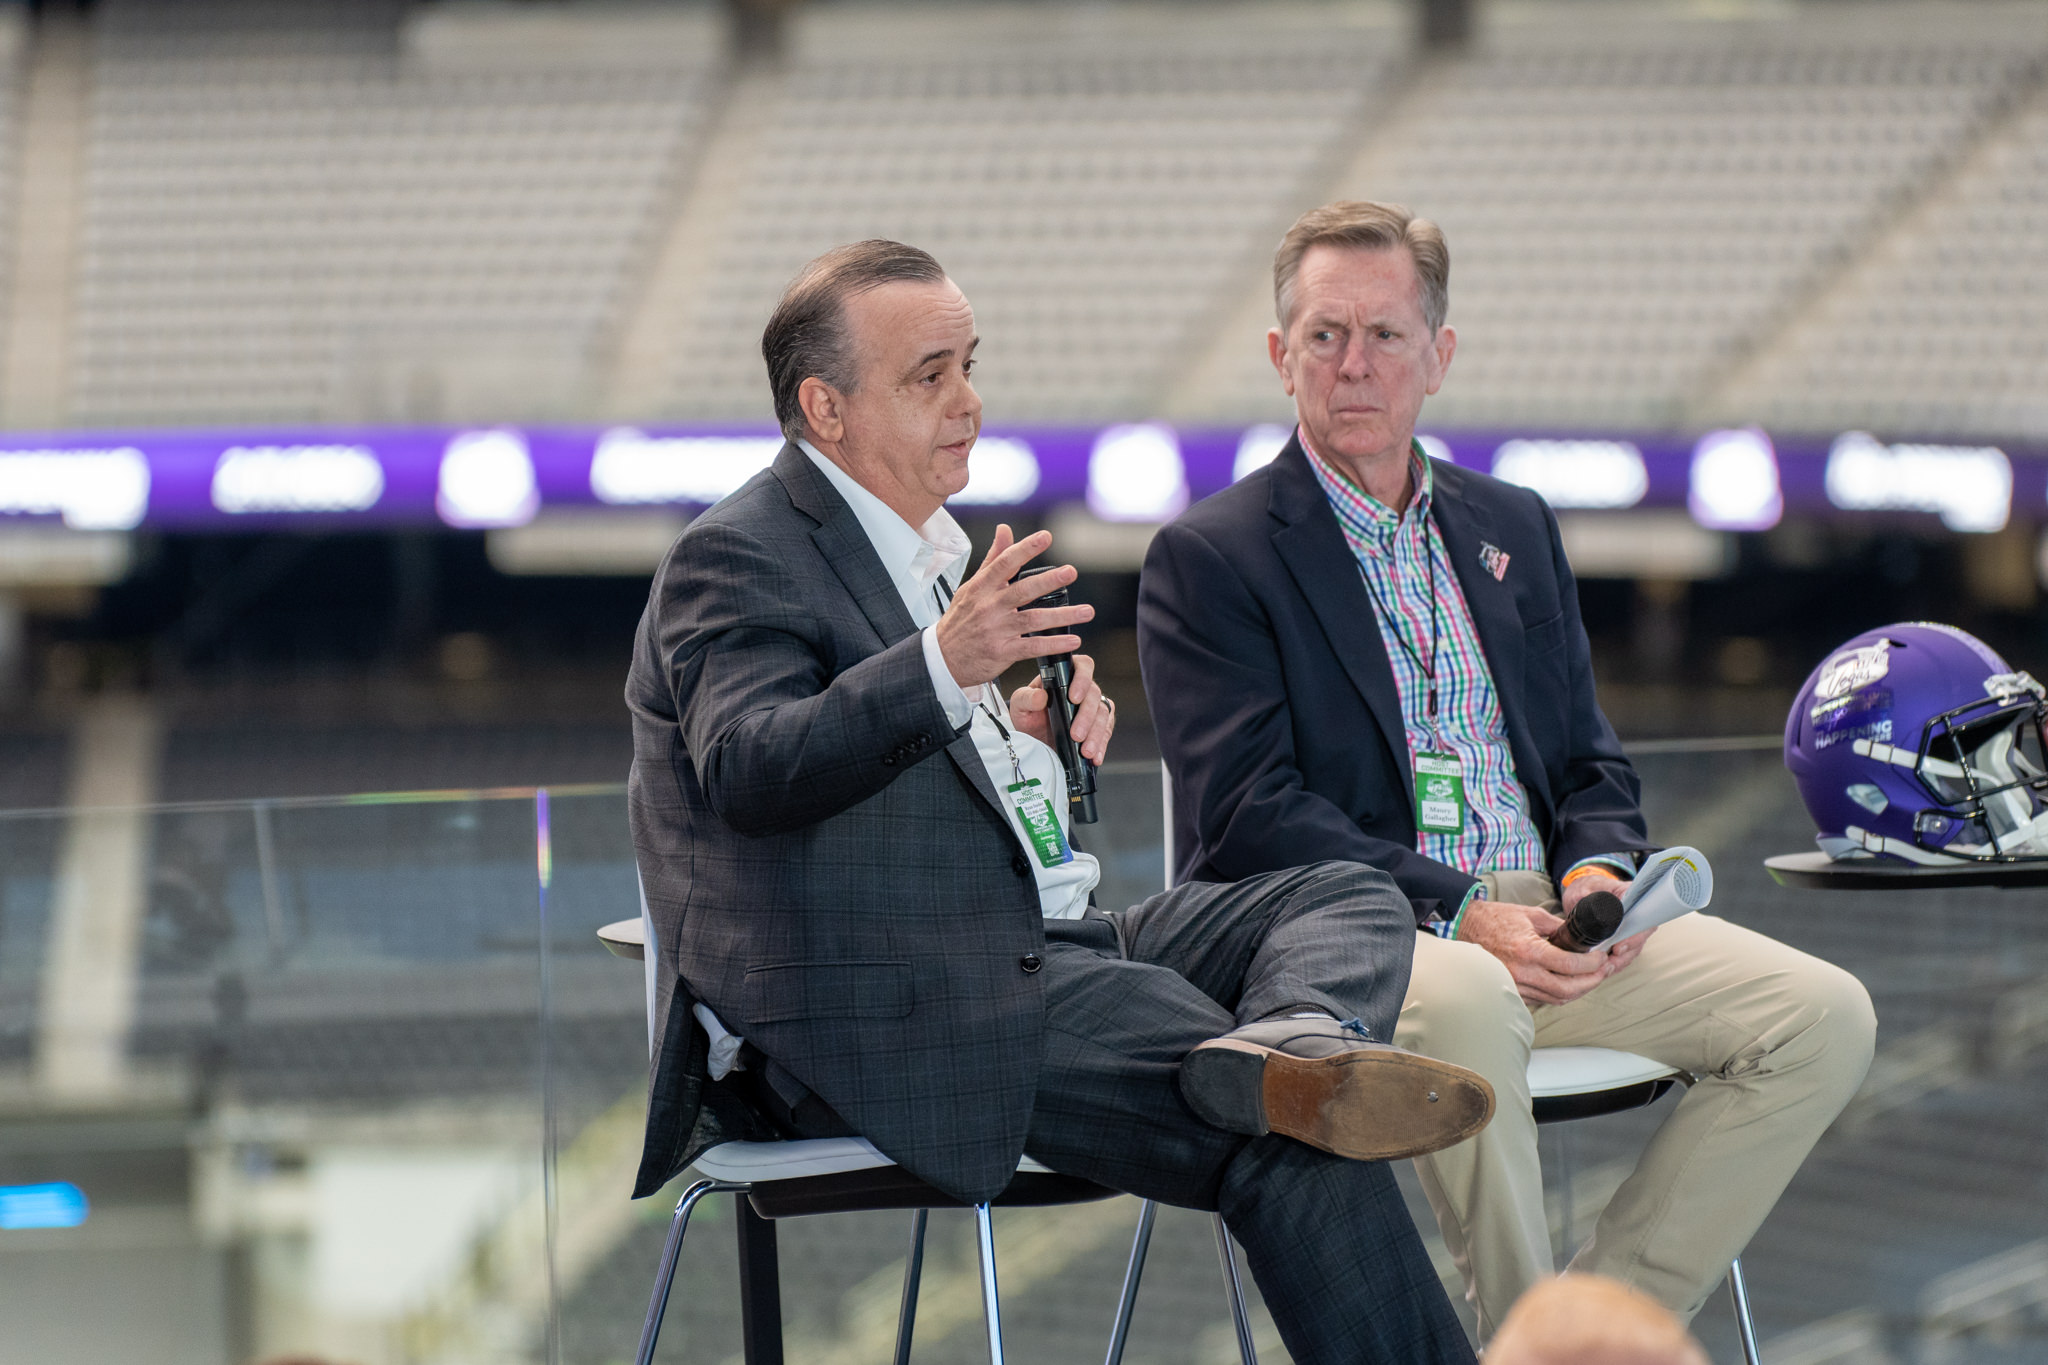 Las Vegas Super Bowl 58: Host Committee Will Rely On $55 Million Budget To Stage NFL’s Big Event In F...